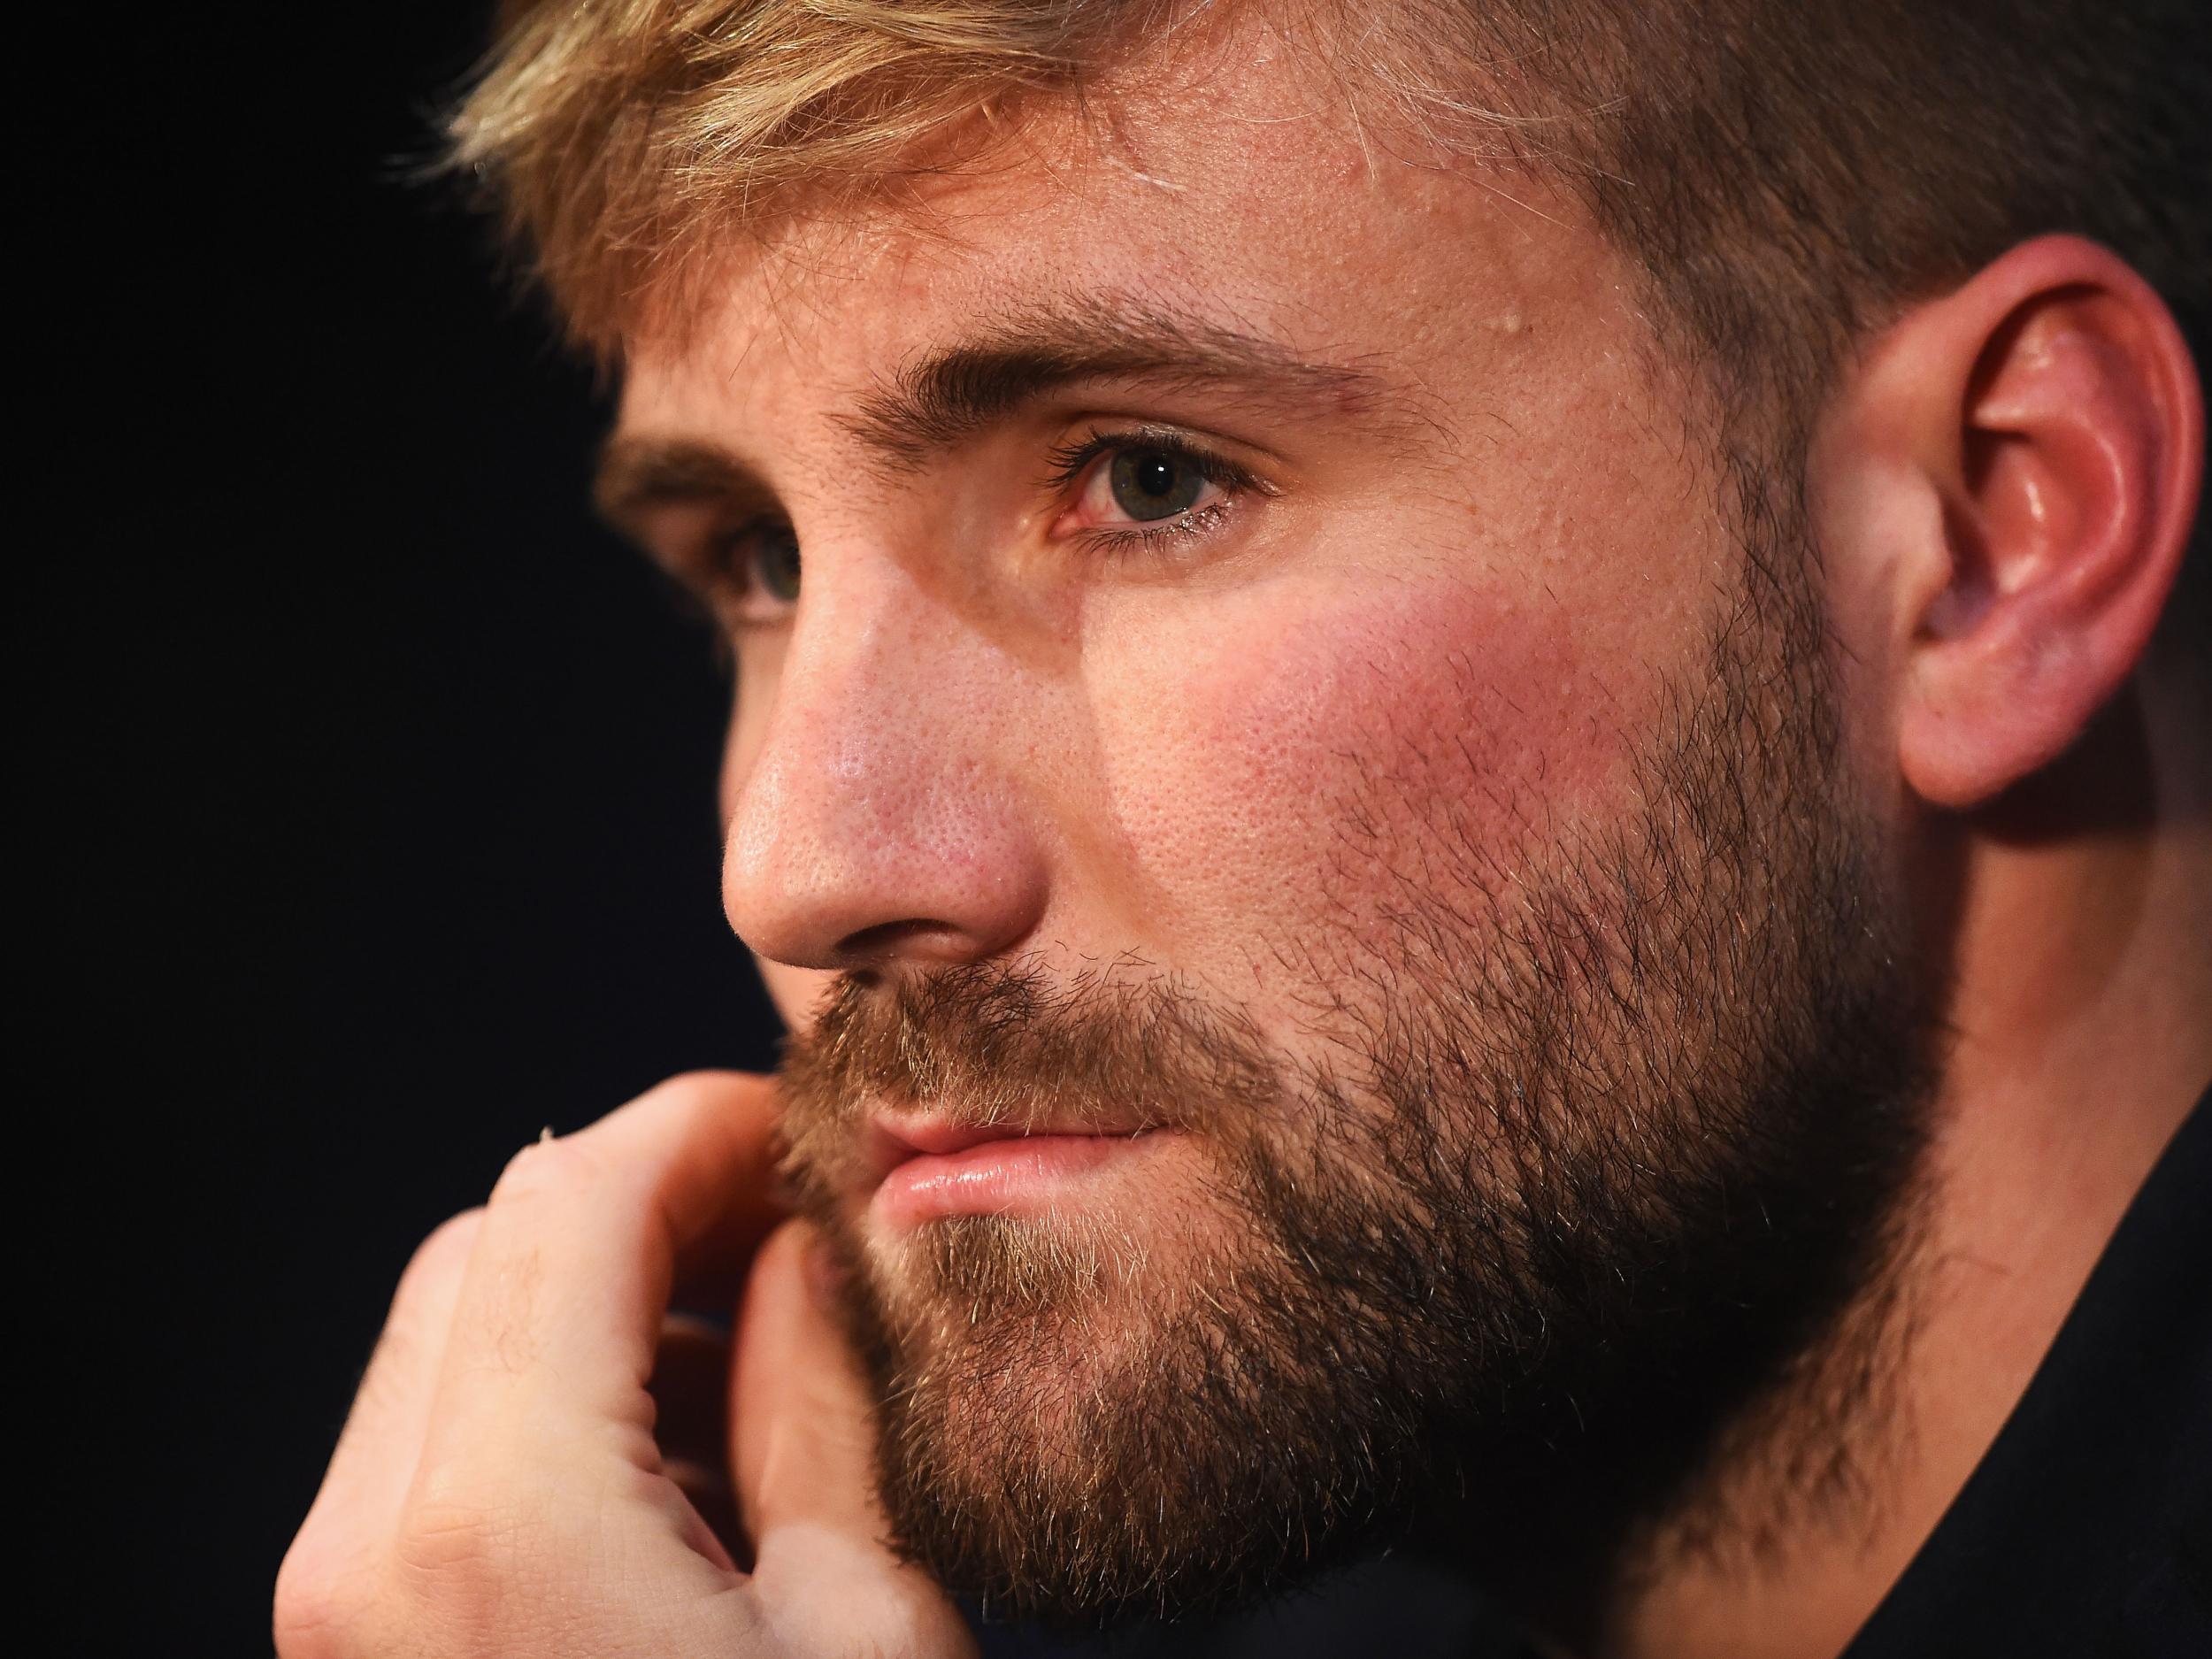 Luke Shaw recently signed a new five-year Manchester United contract